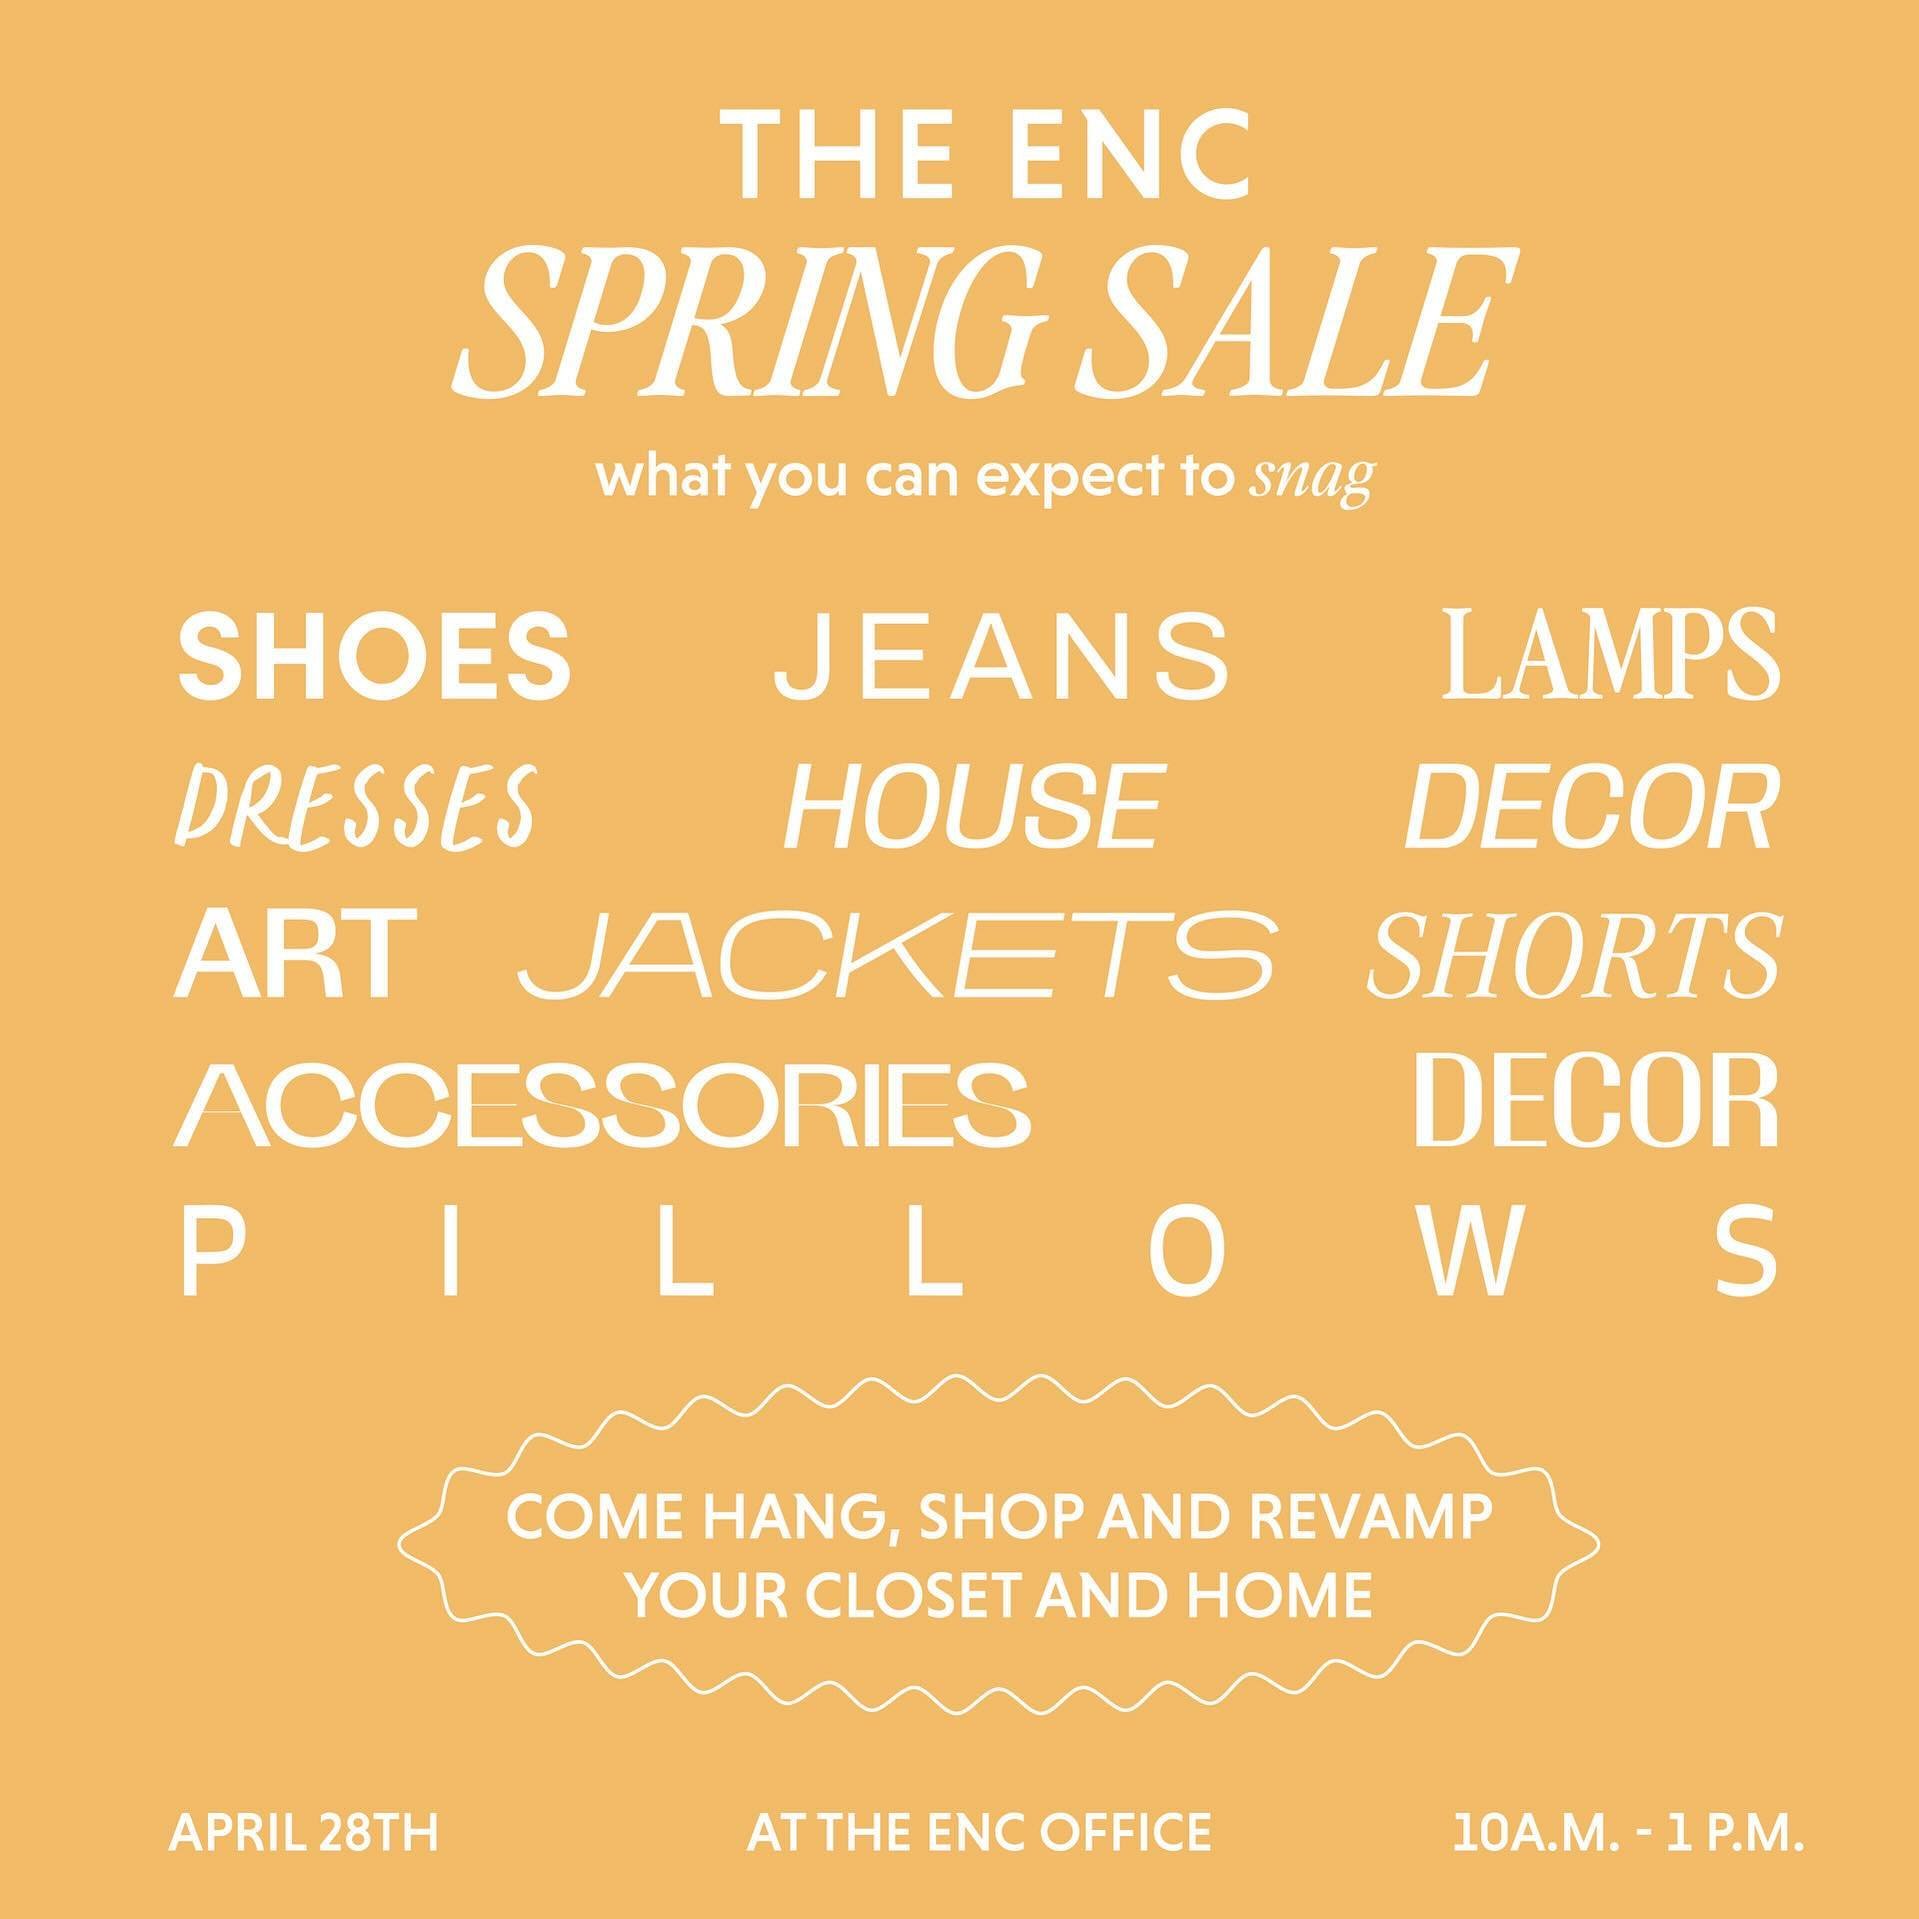 Well friends, almost an entire year later &mdash; and it&rsquo;s time for one EXTRA LARGE, FULLY PACKED, closet/home sale extravaganza! 📍🛍️👡🧺
⠀⠀⠀⠀⠀⠀⠀⠀⠀
Come hang with us on Sunday, April 28th from 10am-1pm for the most epic sale there ever was. P